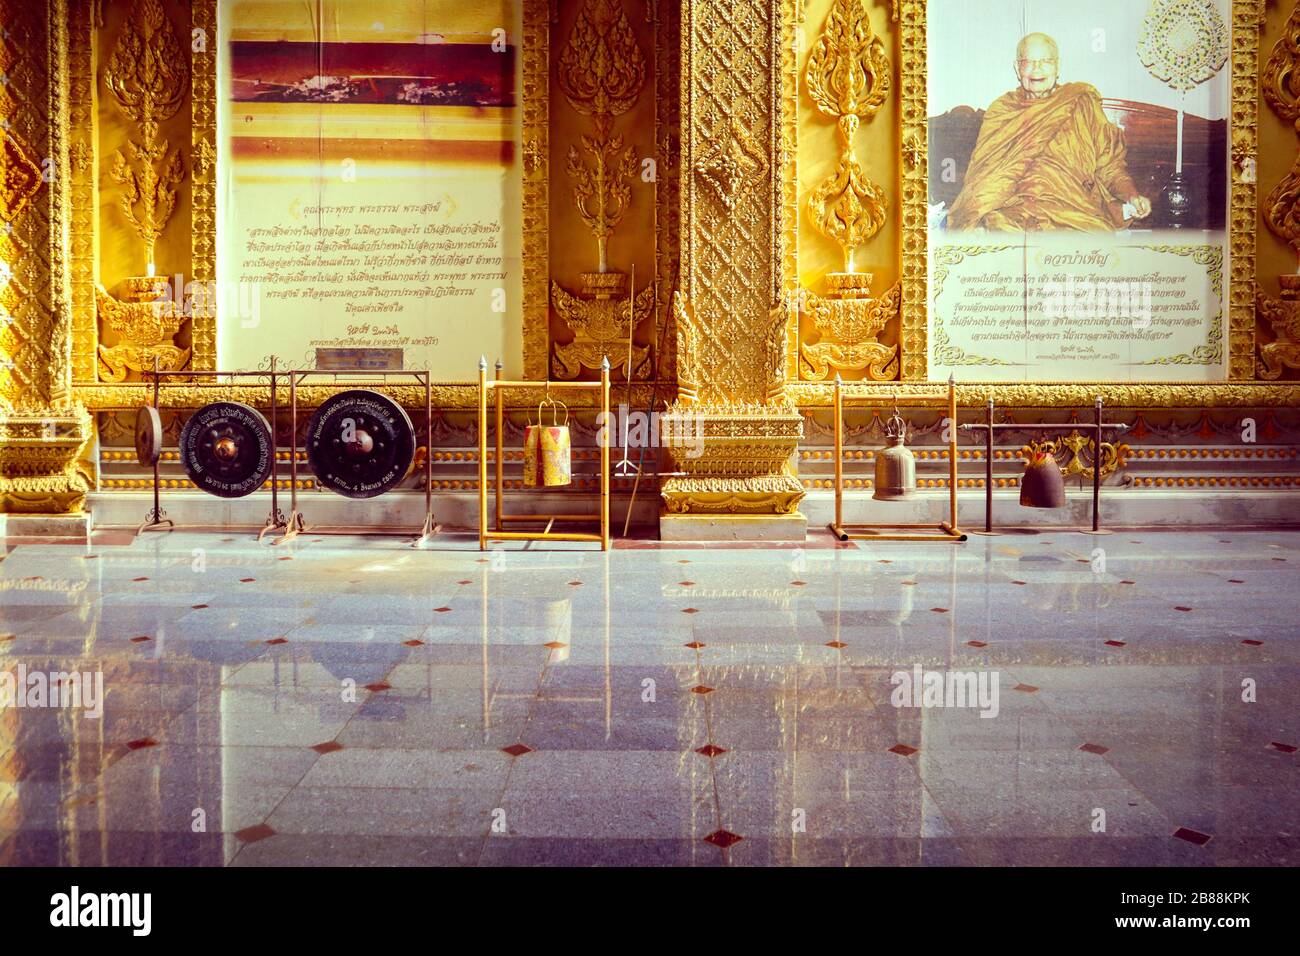 A hall in a Buddist temple Stock Photo